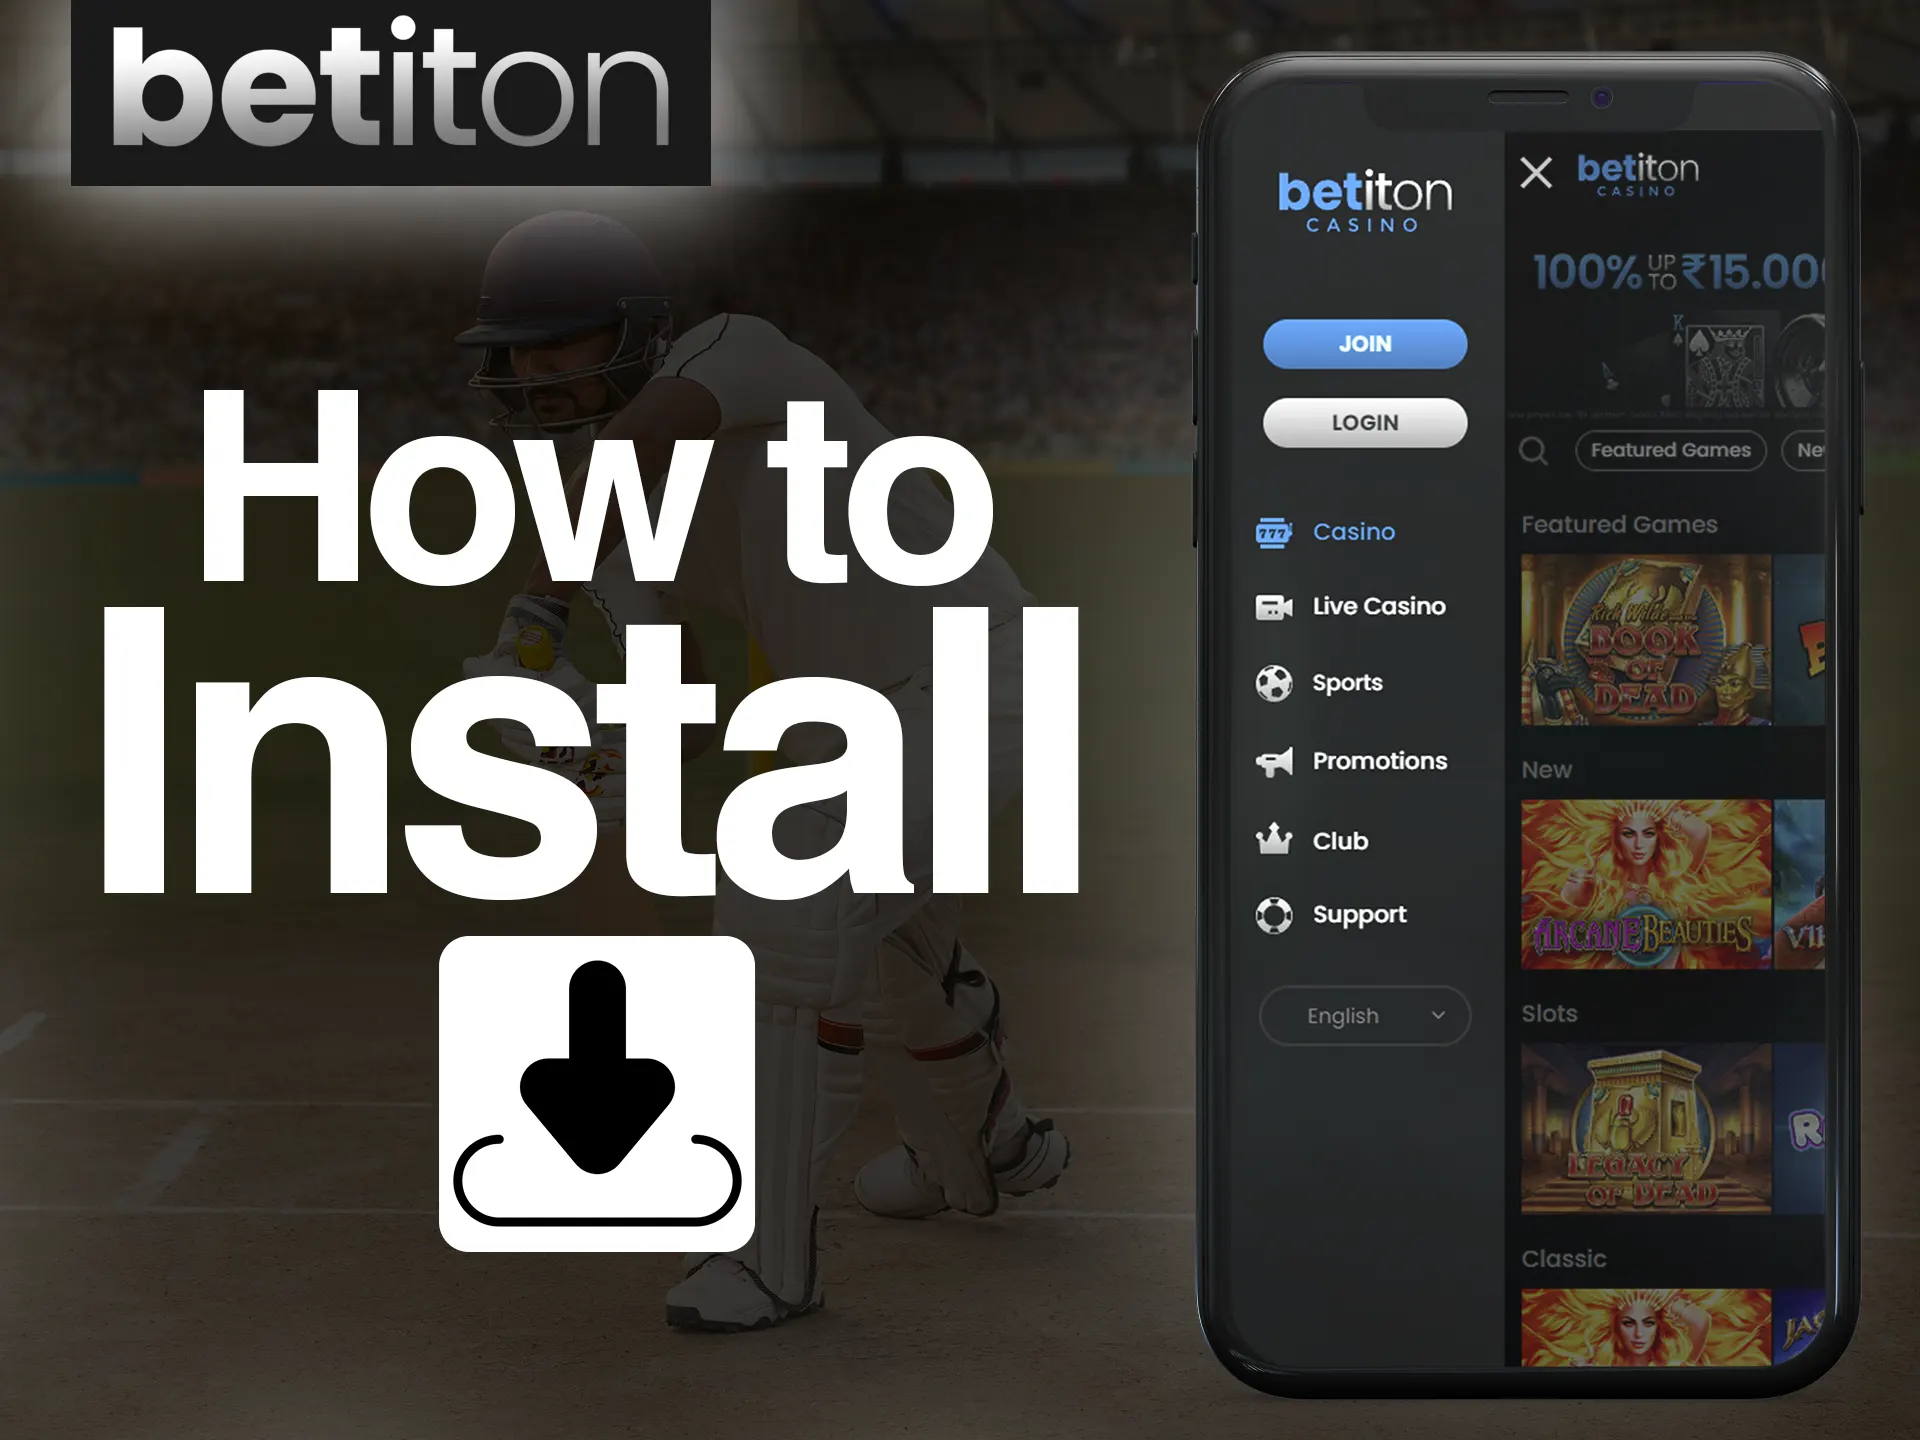 Install the Betiton app by following simple steps.